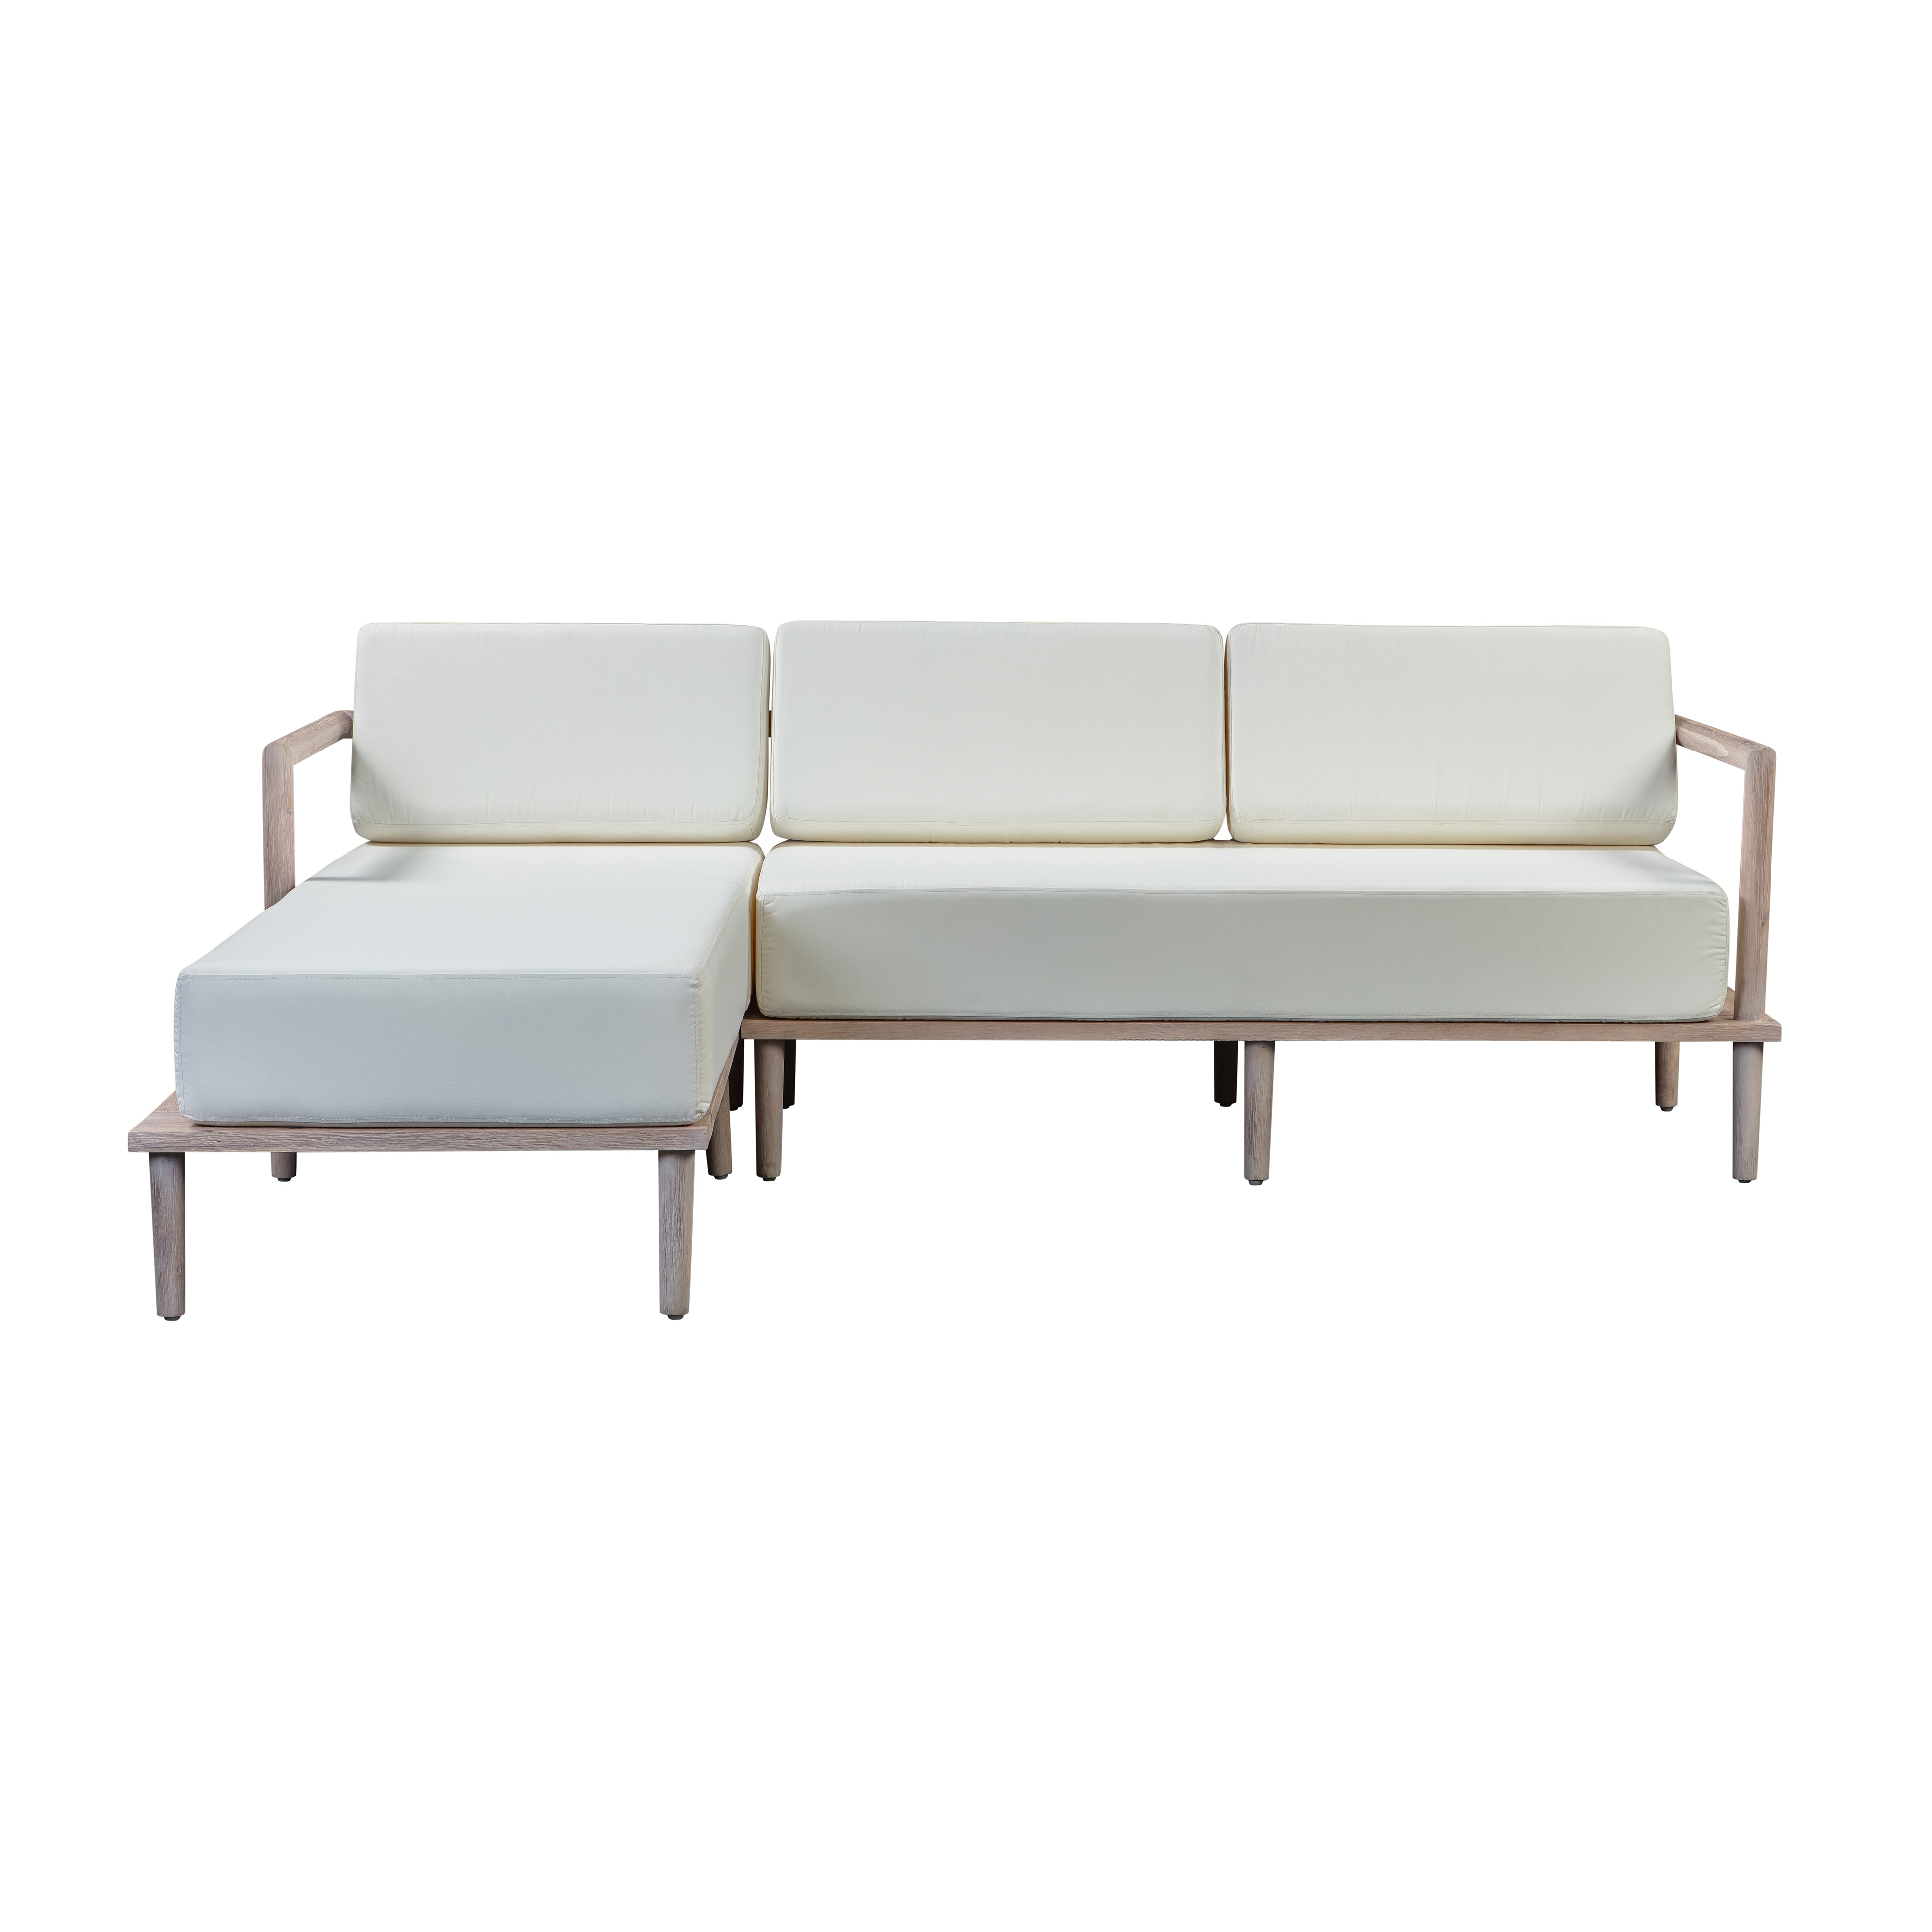 Emerson Cream Outdoor Sectional - LAF - Image 1